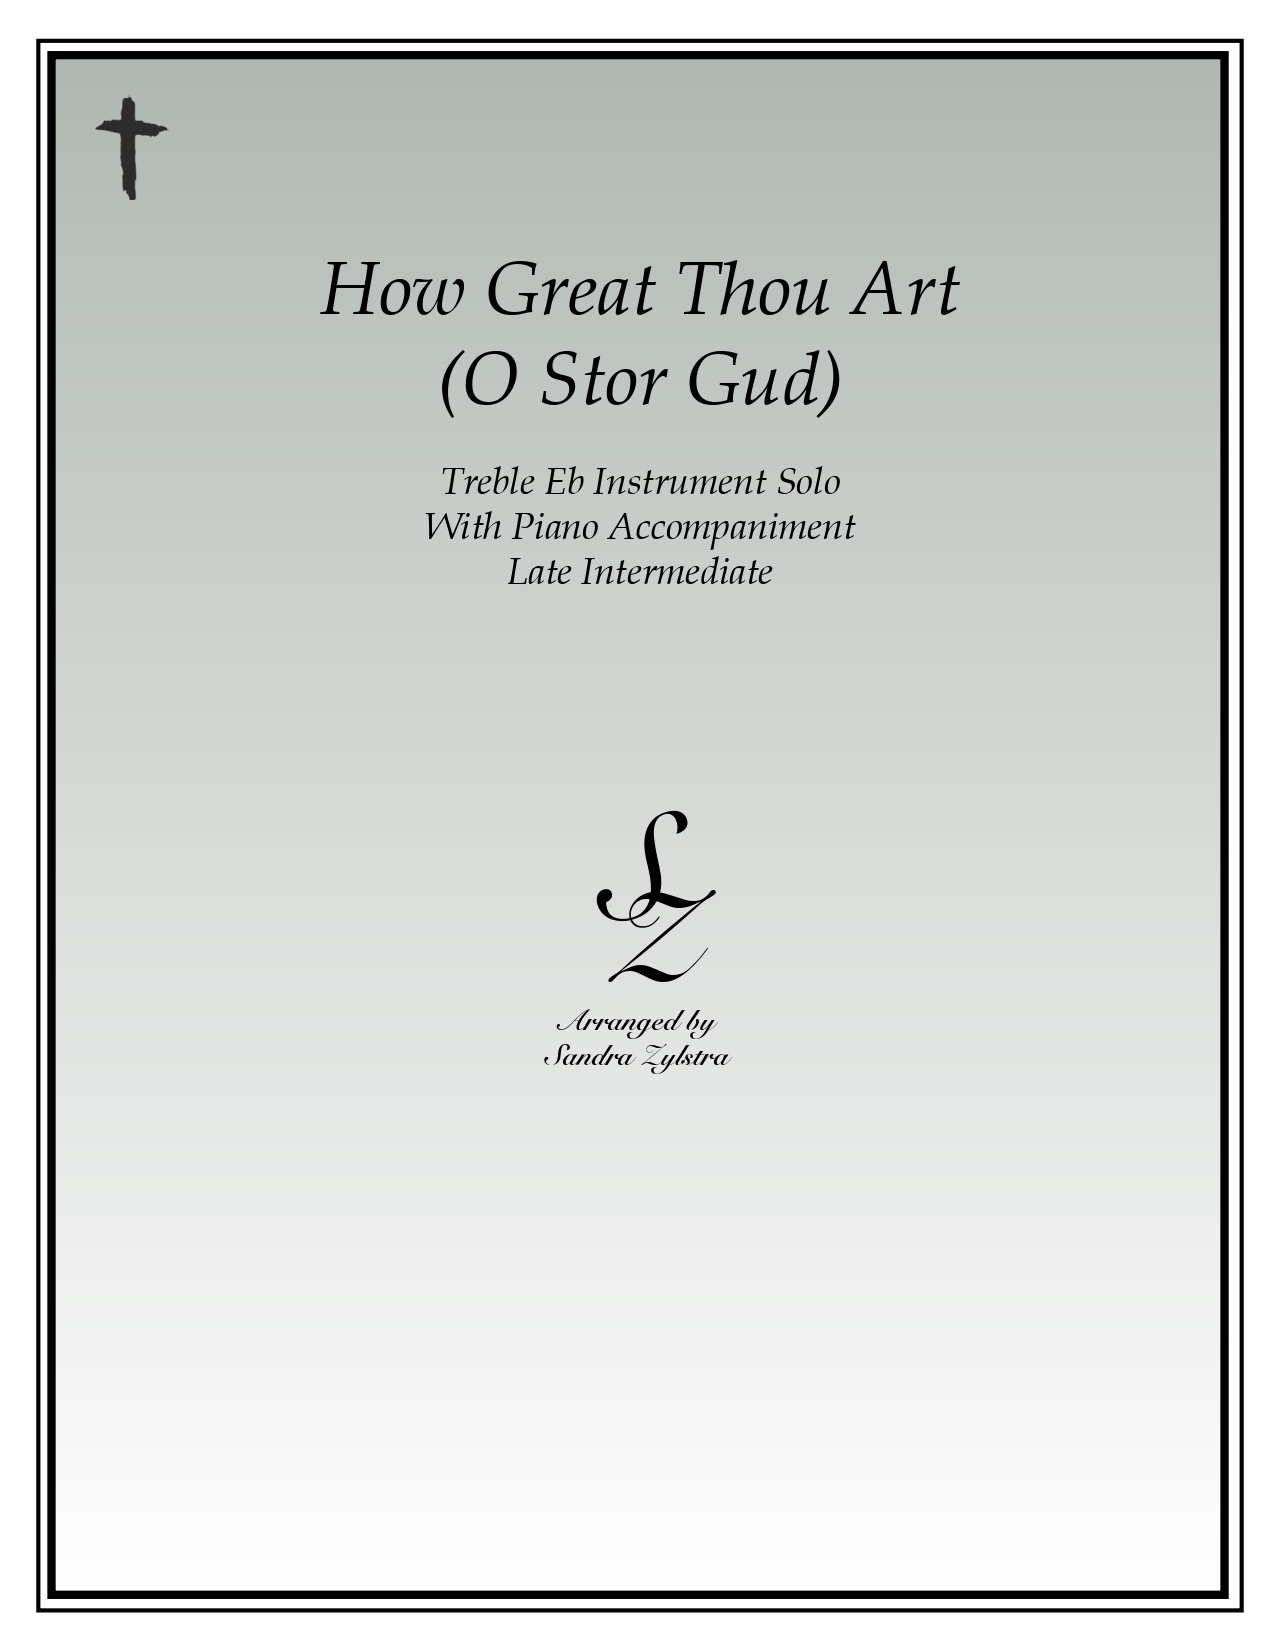 How Great Thou Art Eb instrument solo part cover page 00011